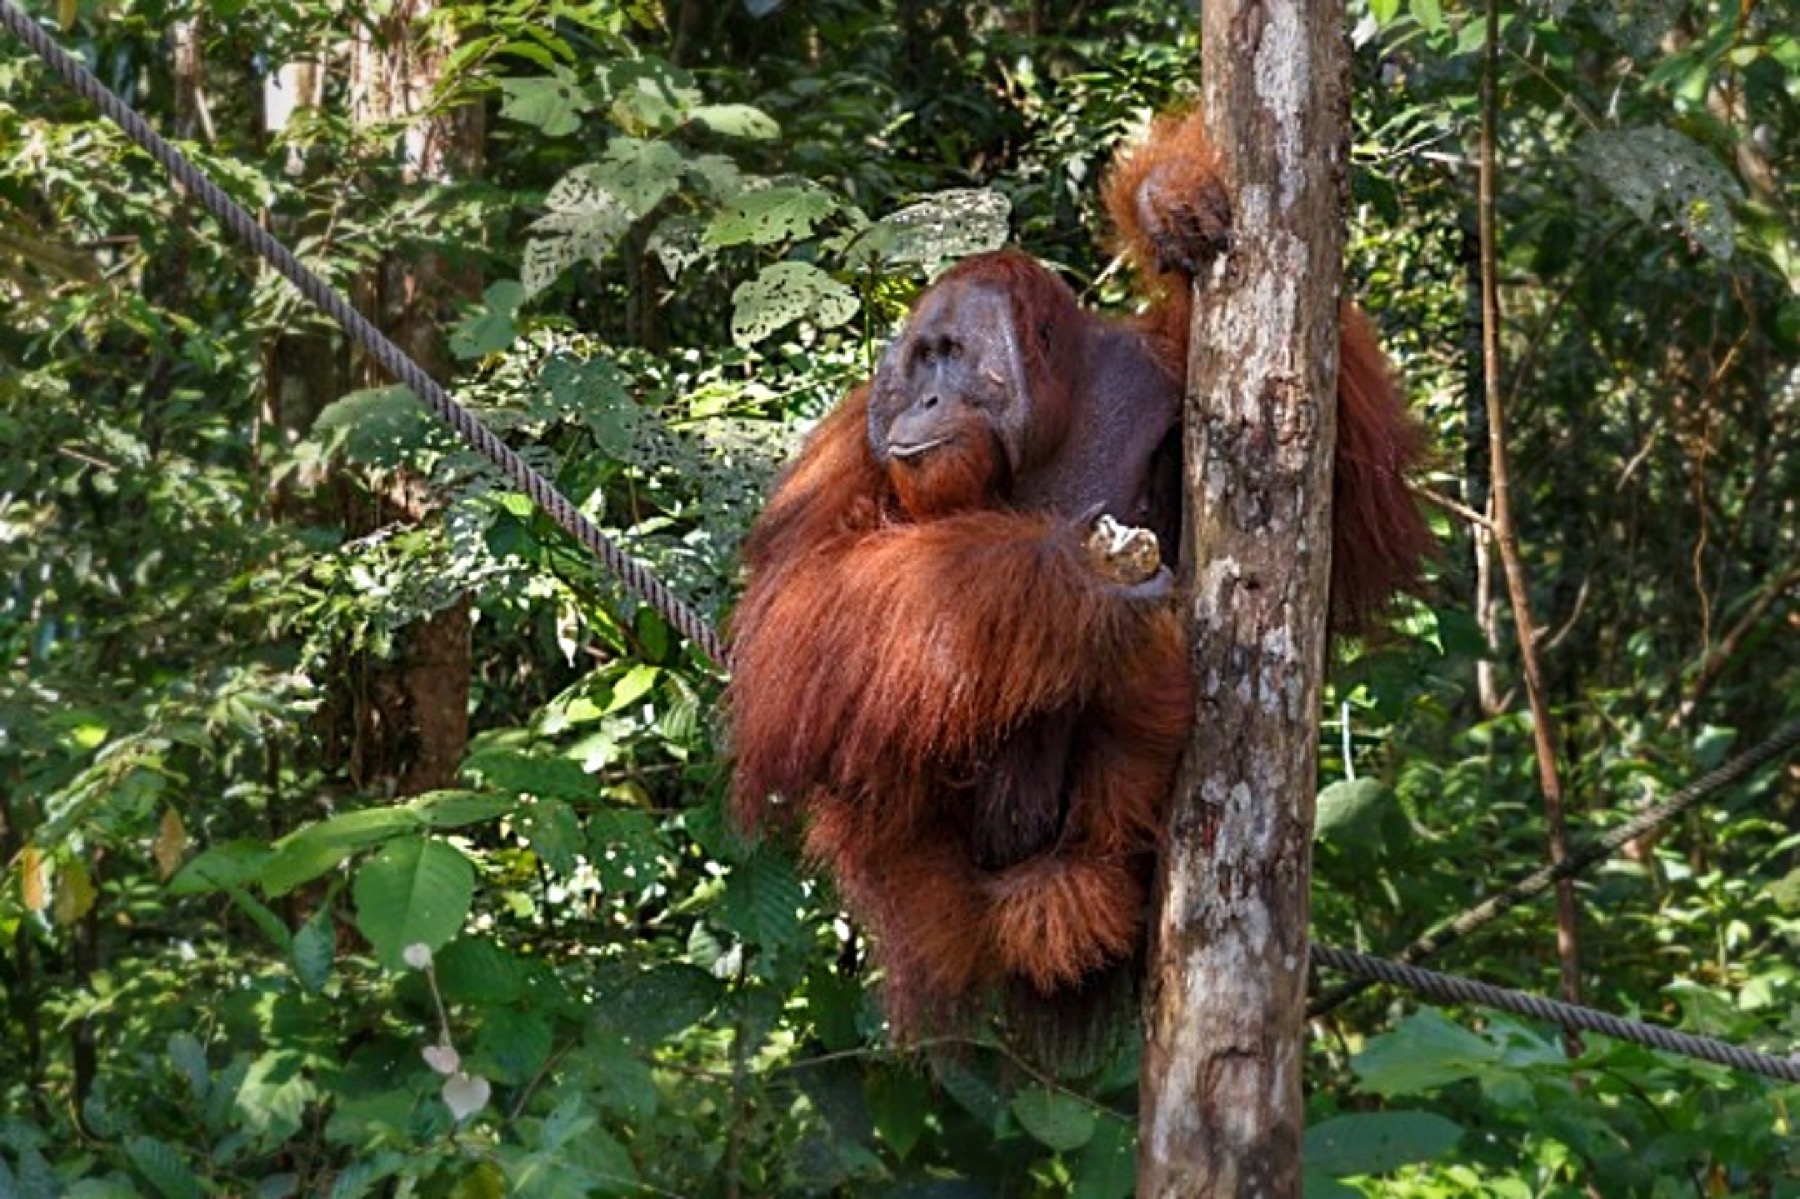 The IUCN's Red List report states that all three sub-species of orangutans, namely the Bornean, Sumatran and Tapanuli, are extremely endangered as a result of the destruction of forest resources and deforestation for oil palm plantations